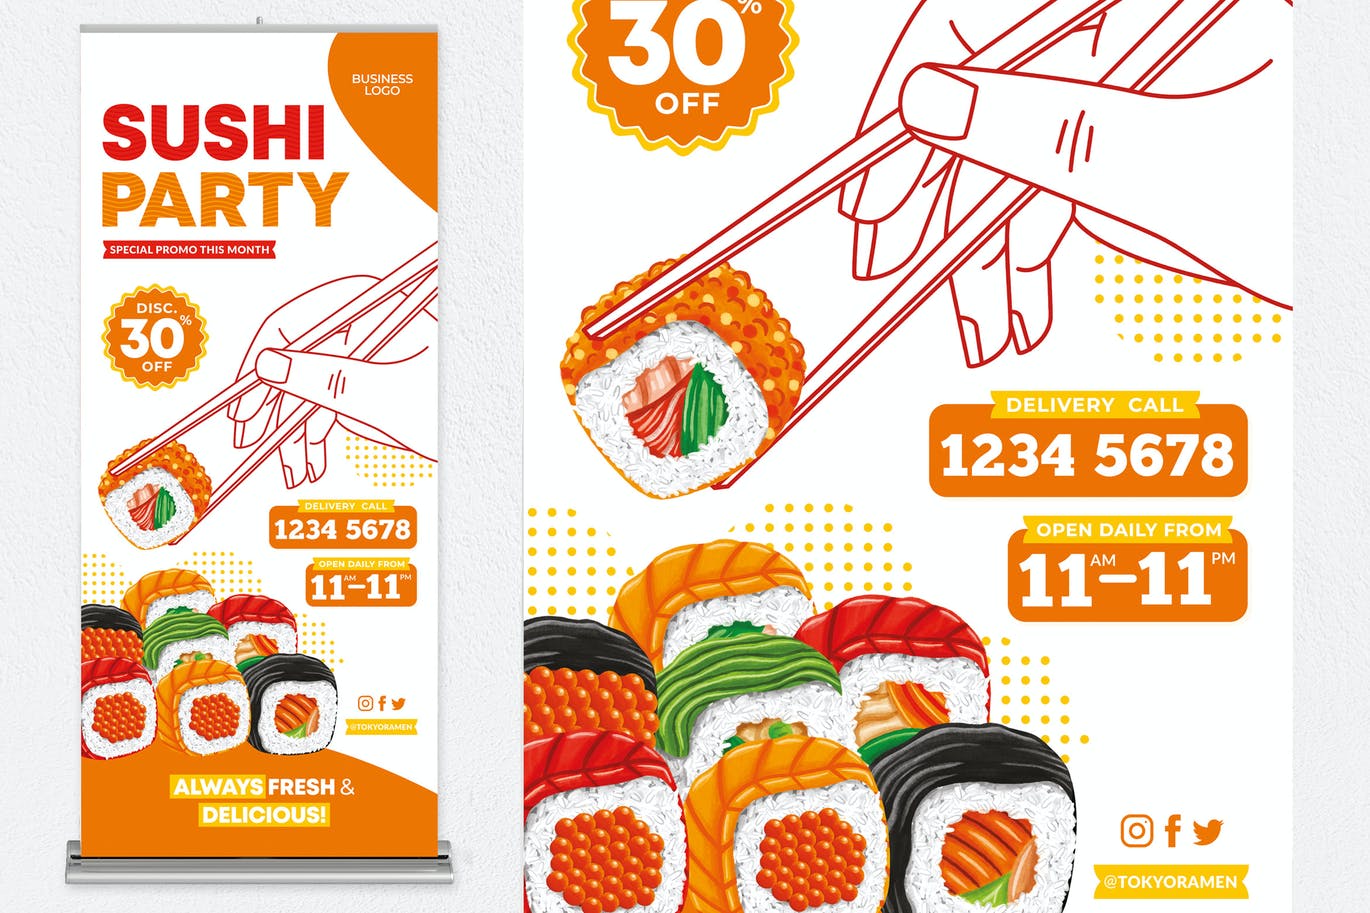 Sushi Party Roll Up Banner